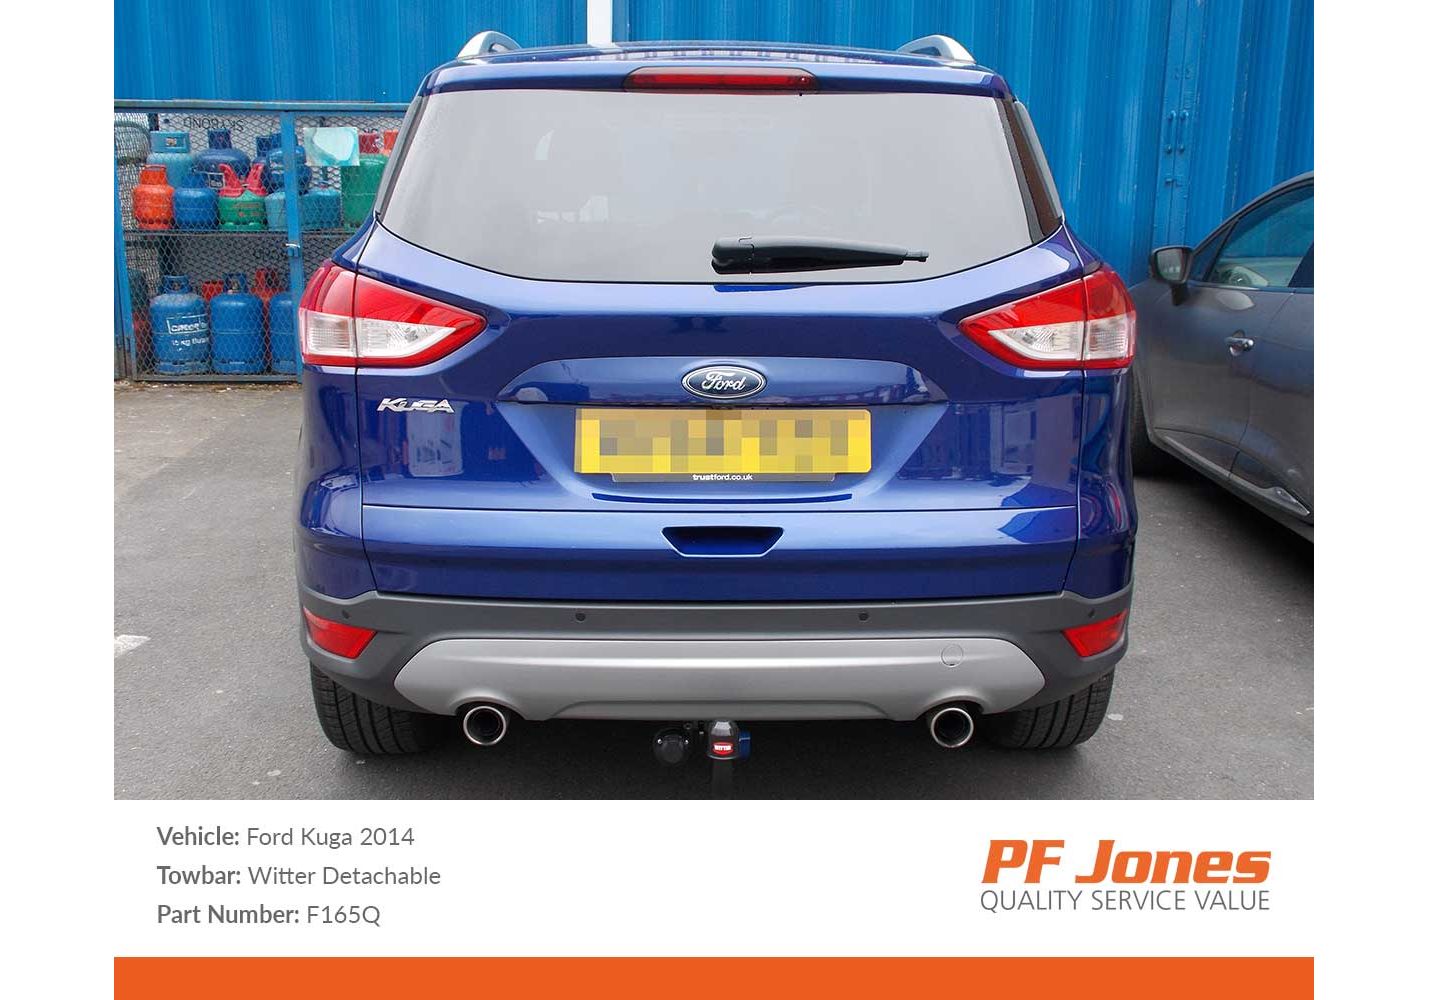 Rearbar FORD Kuga from MY 2013 to 2016 VM02791 MJ2013